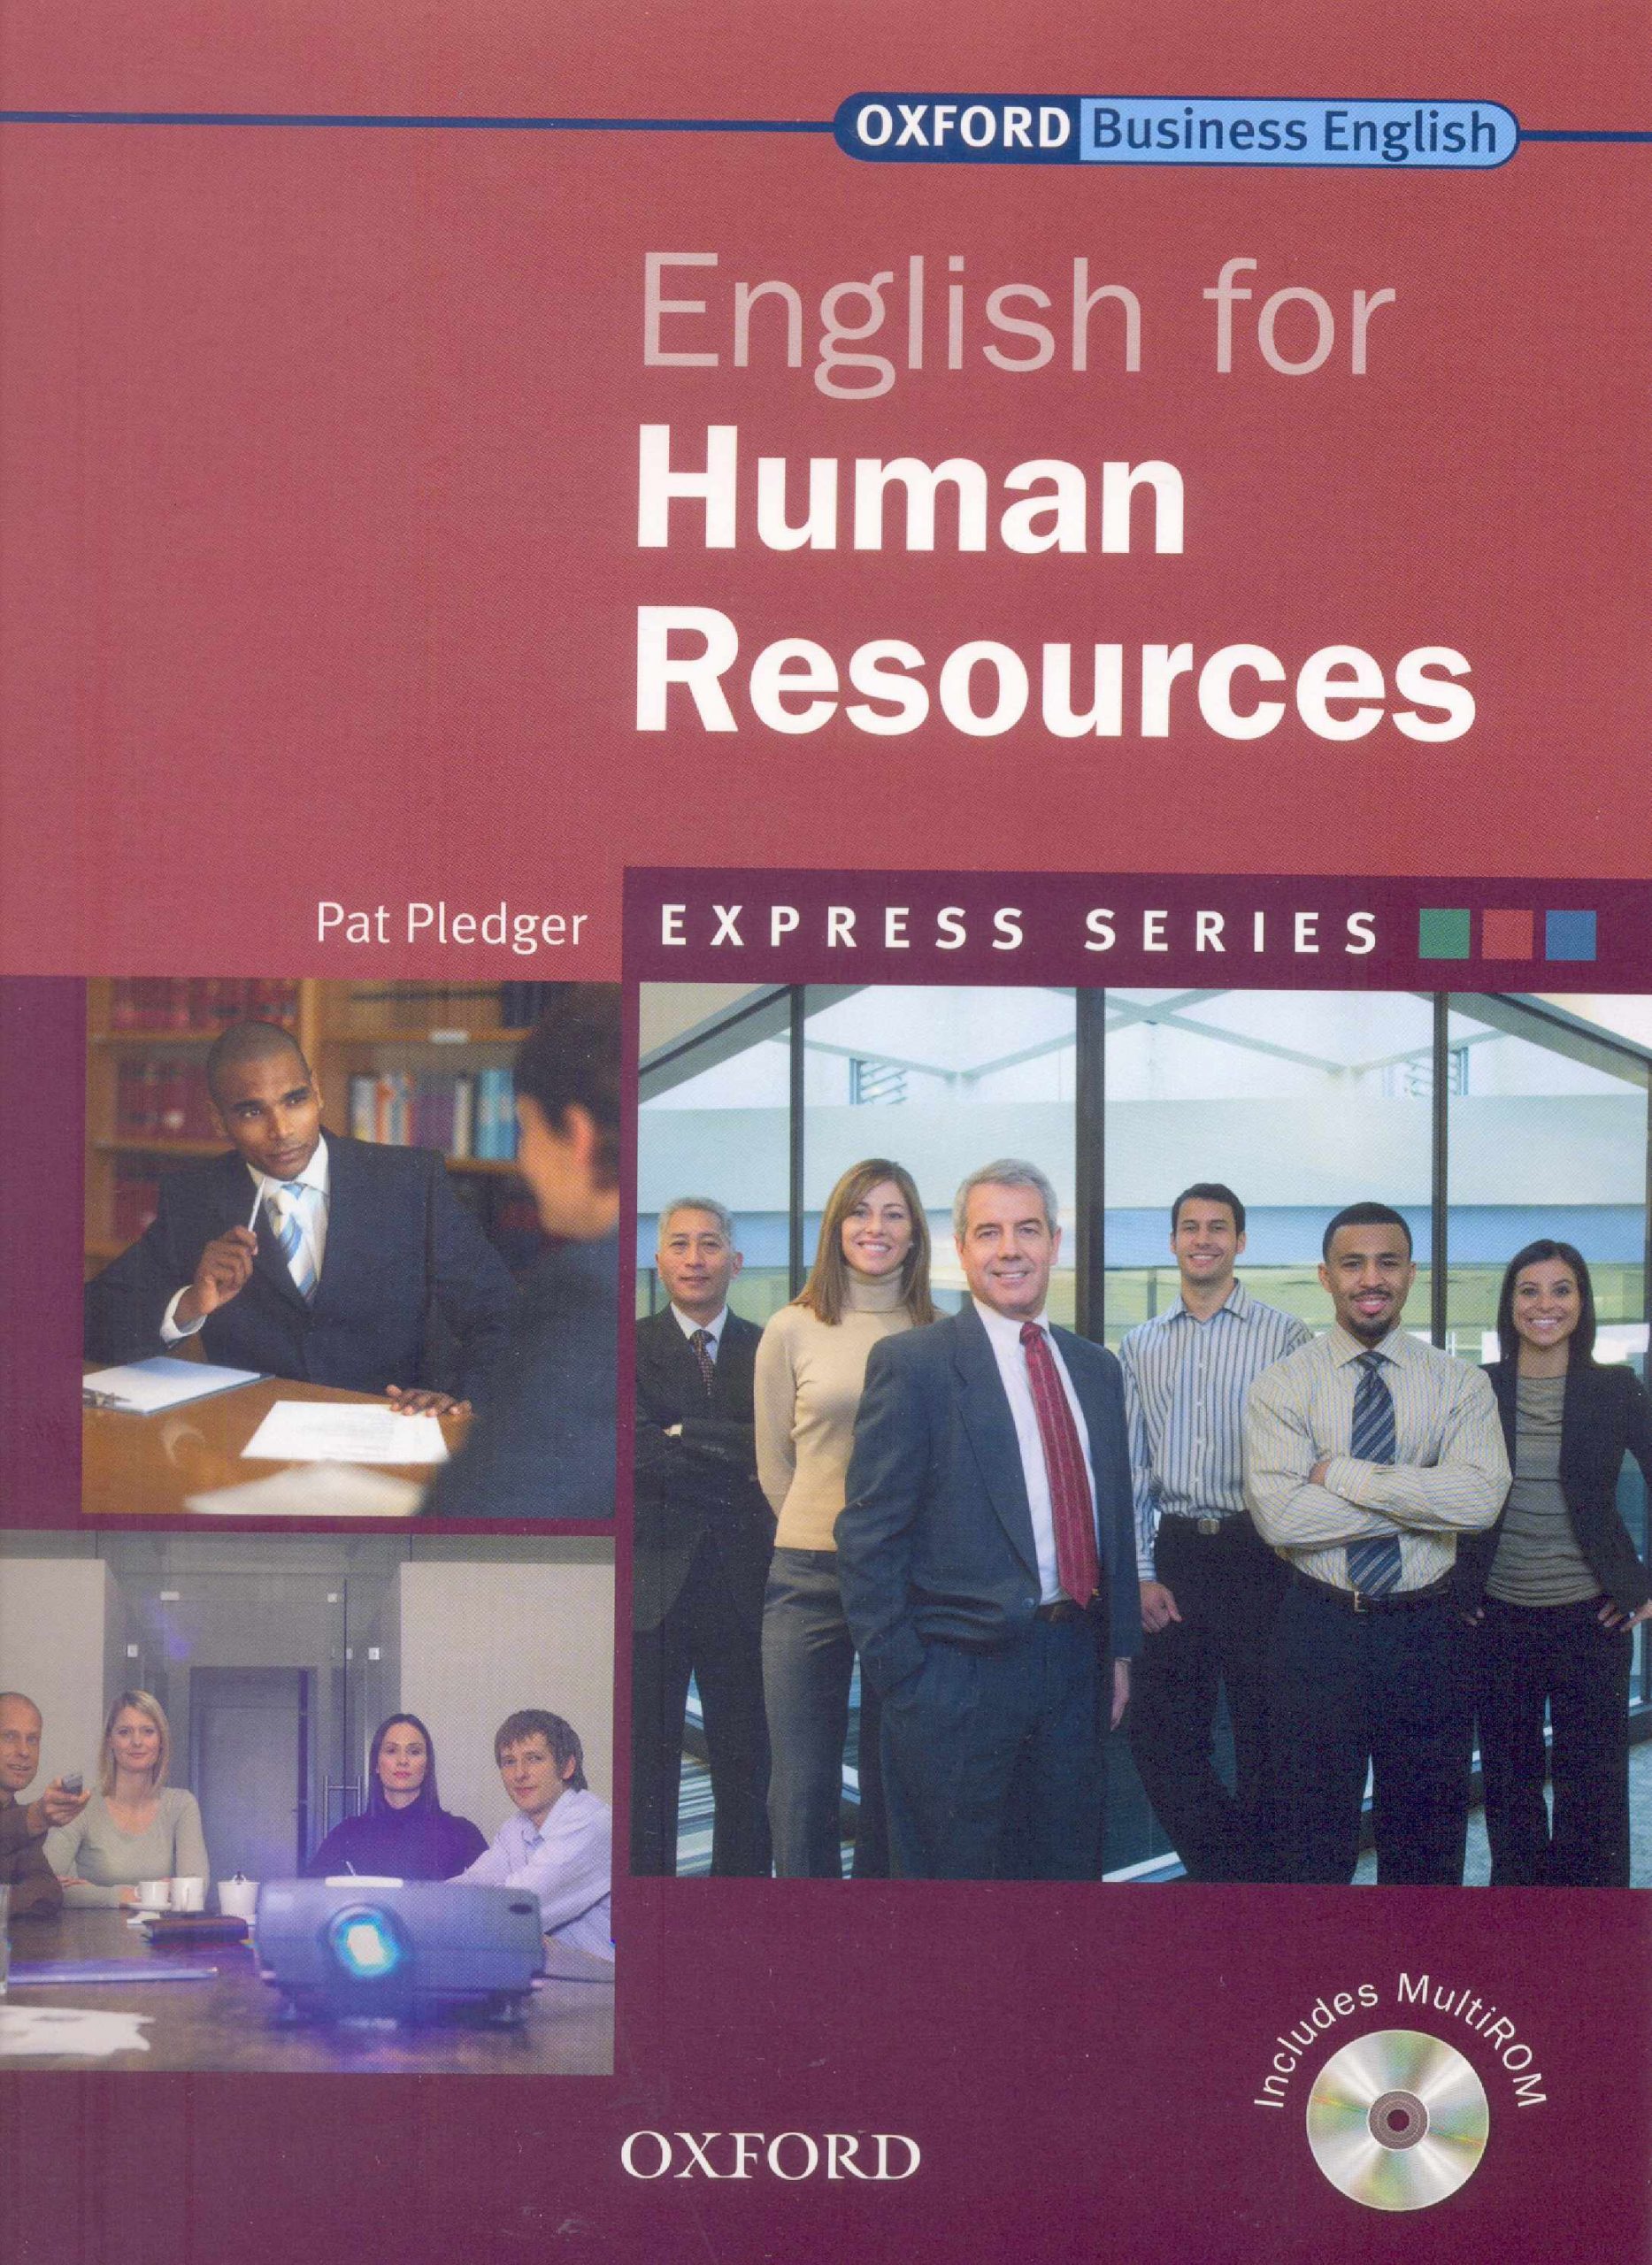 Oxford-Business-English-for-Human-Resources